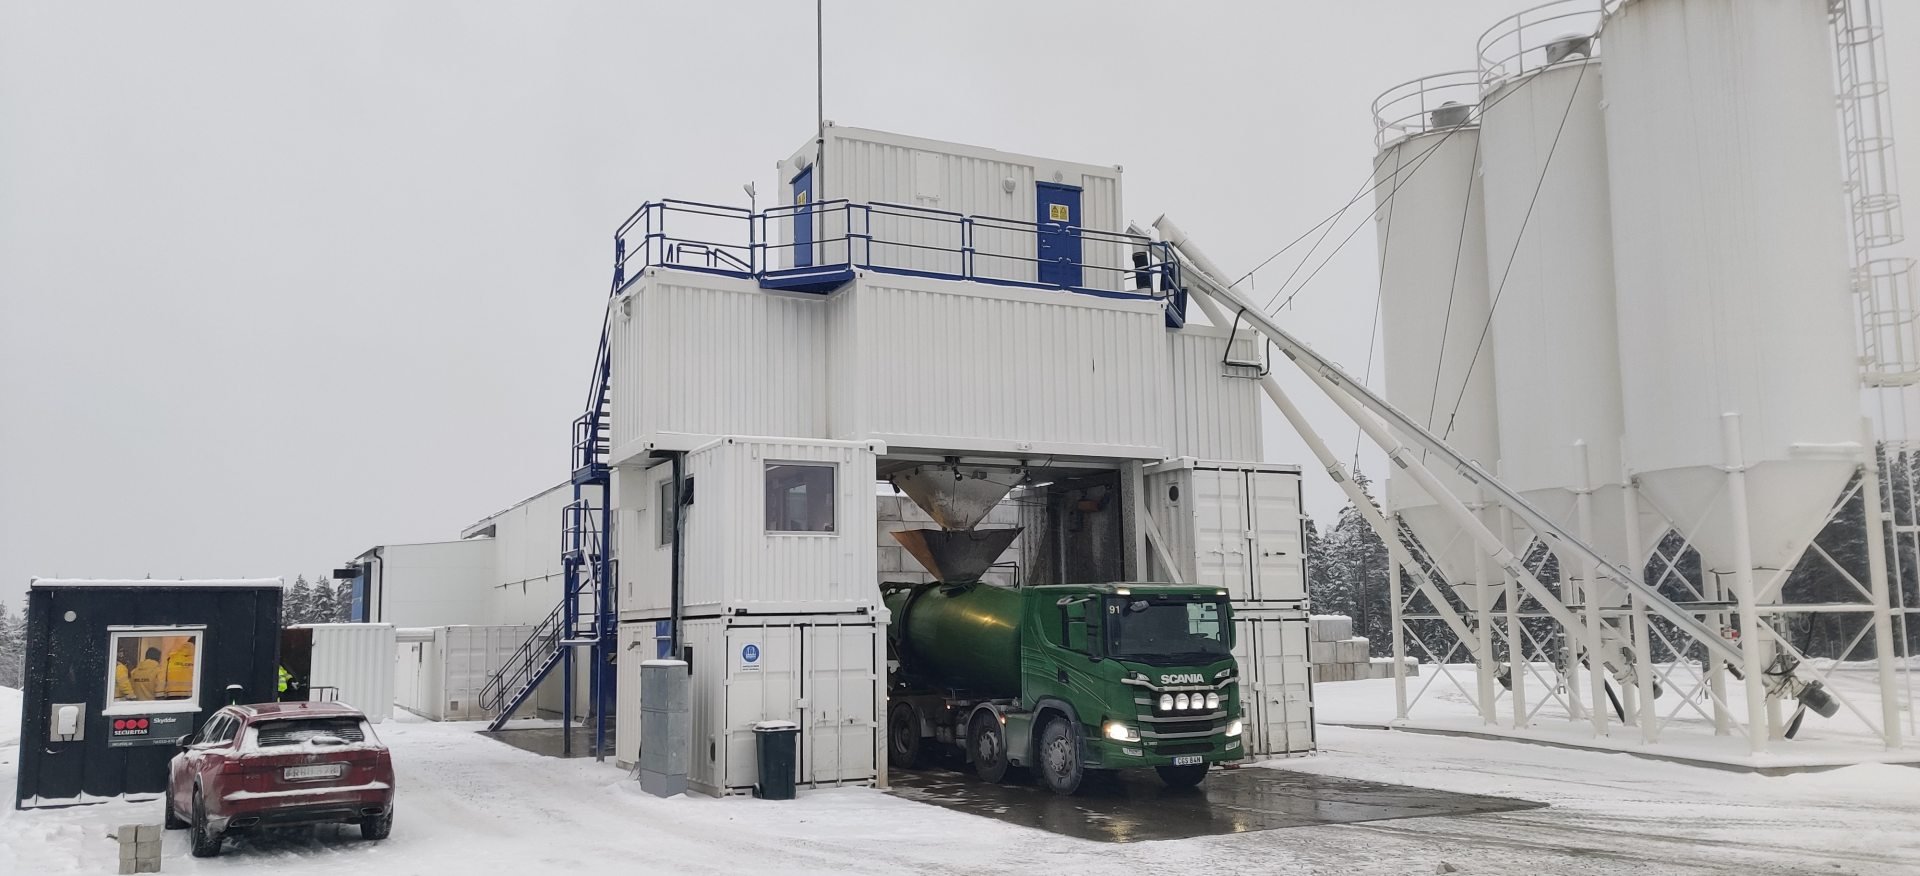 Tecwill-batch-plant-winter-equipped-cold-weather-concreting